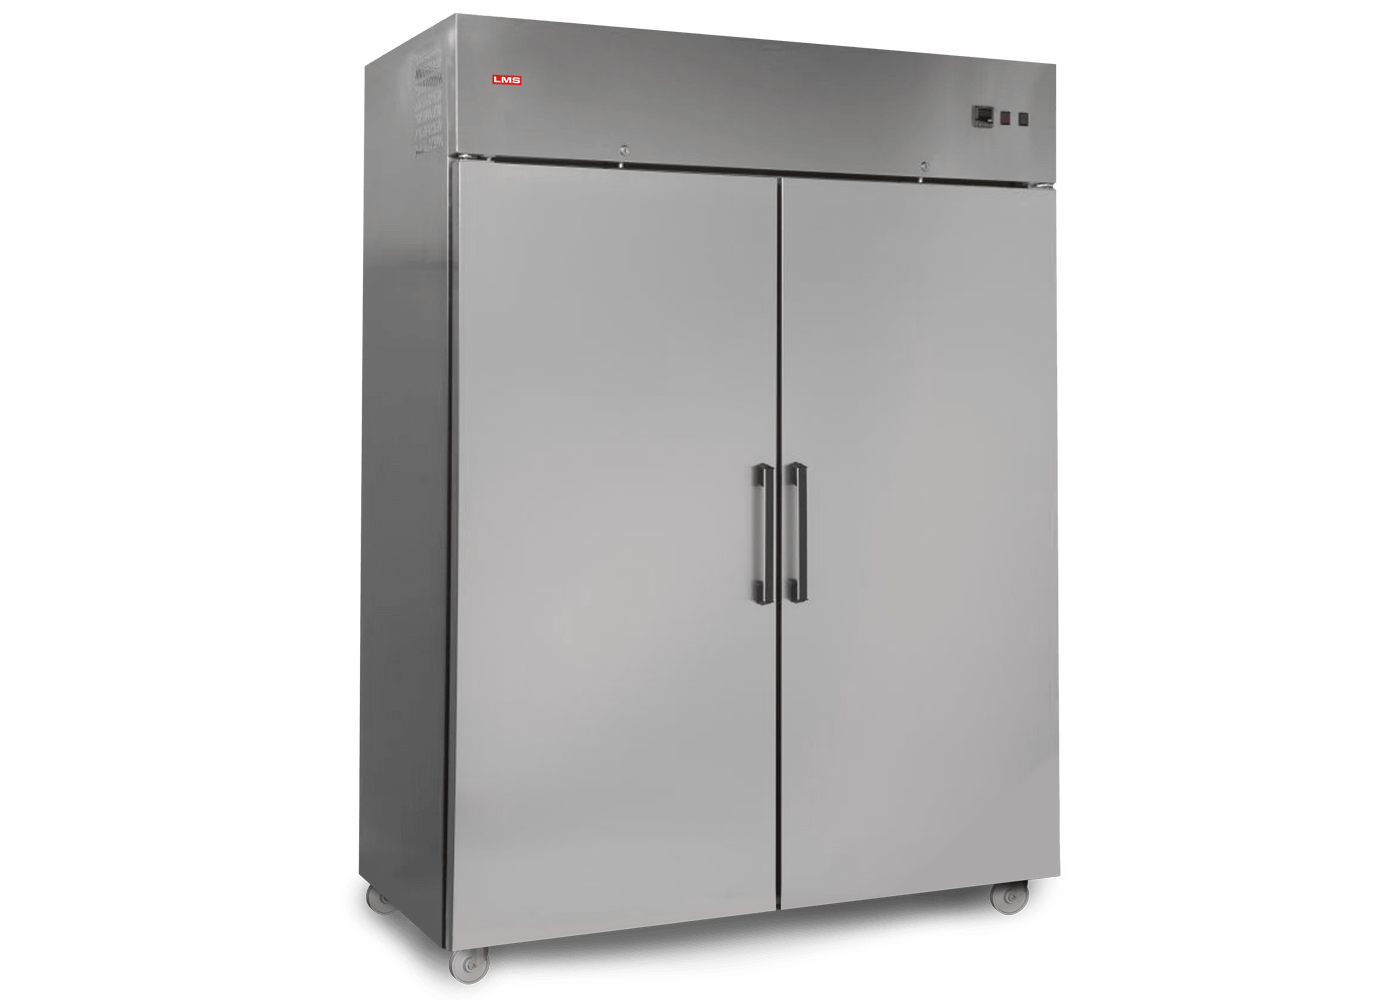 LMS Free-Standing Series 4 Digital Cooled Incubators, with Full PID Heating/Control, 1200 Litres Capacity